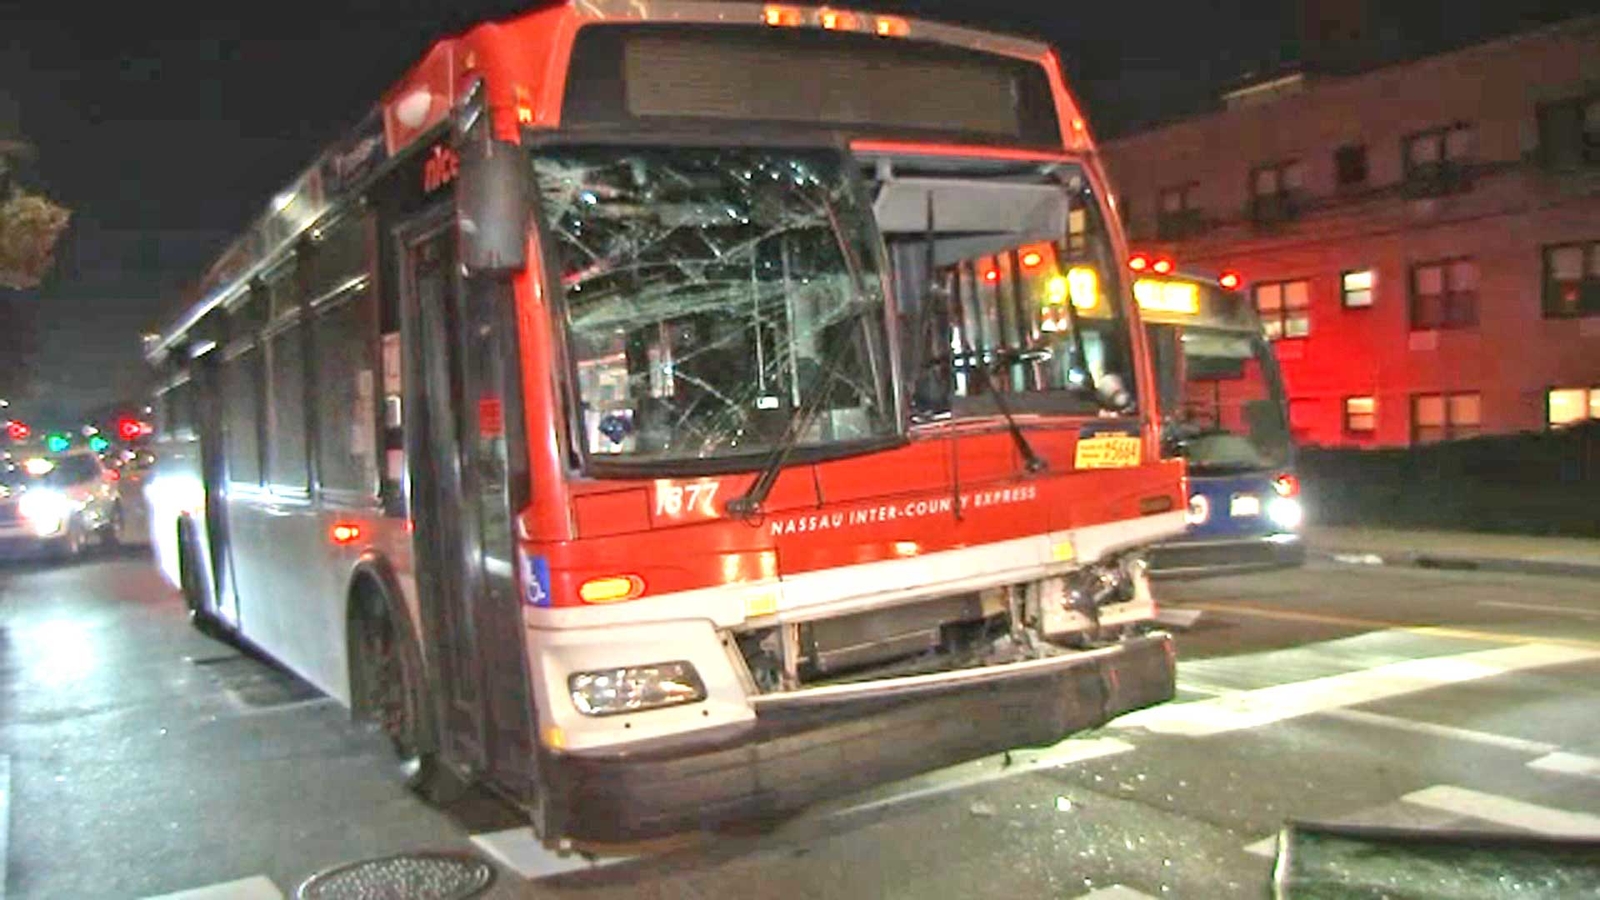 Bus collides with garbage truck in Queens; 10 people hurt